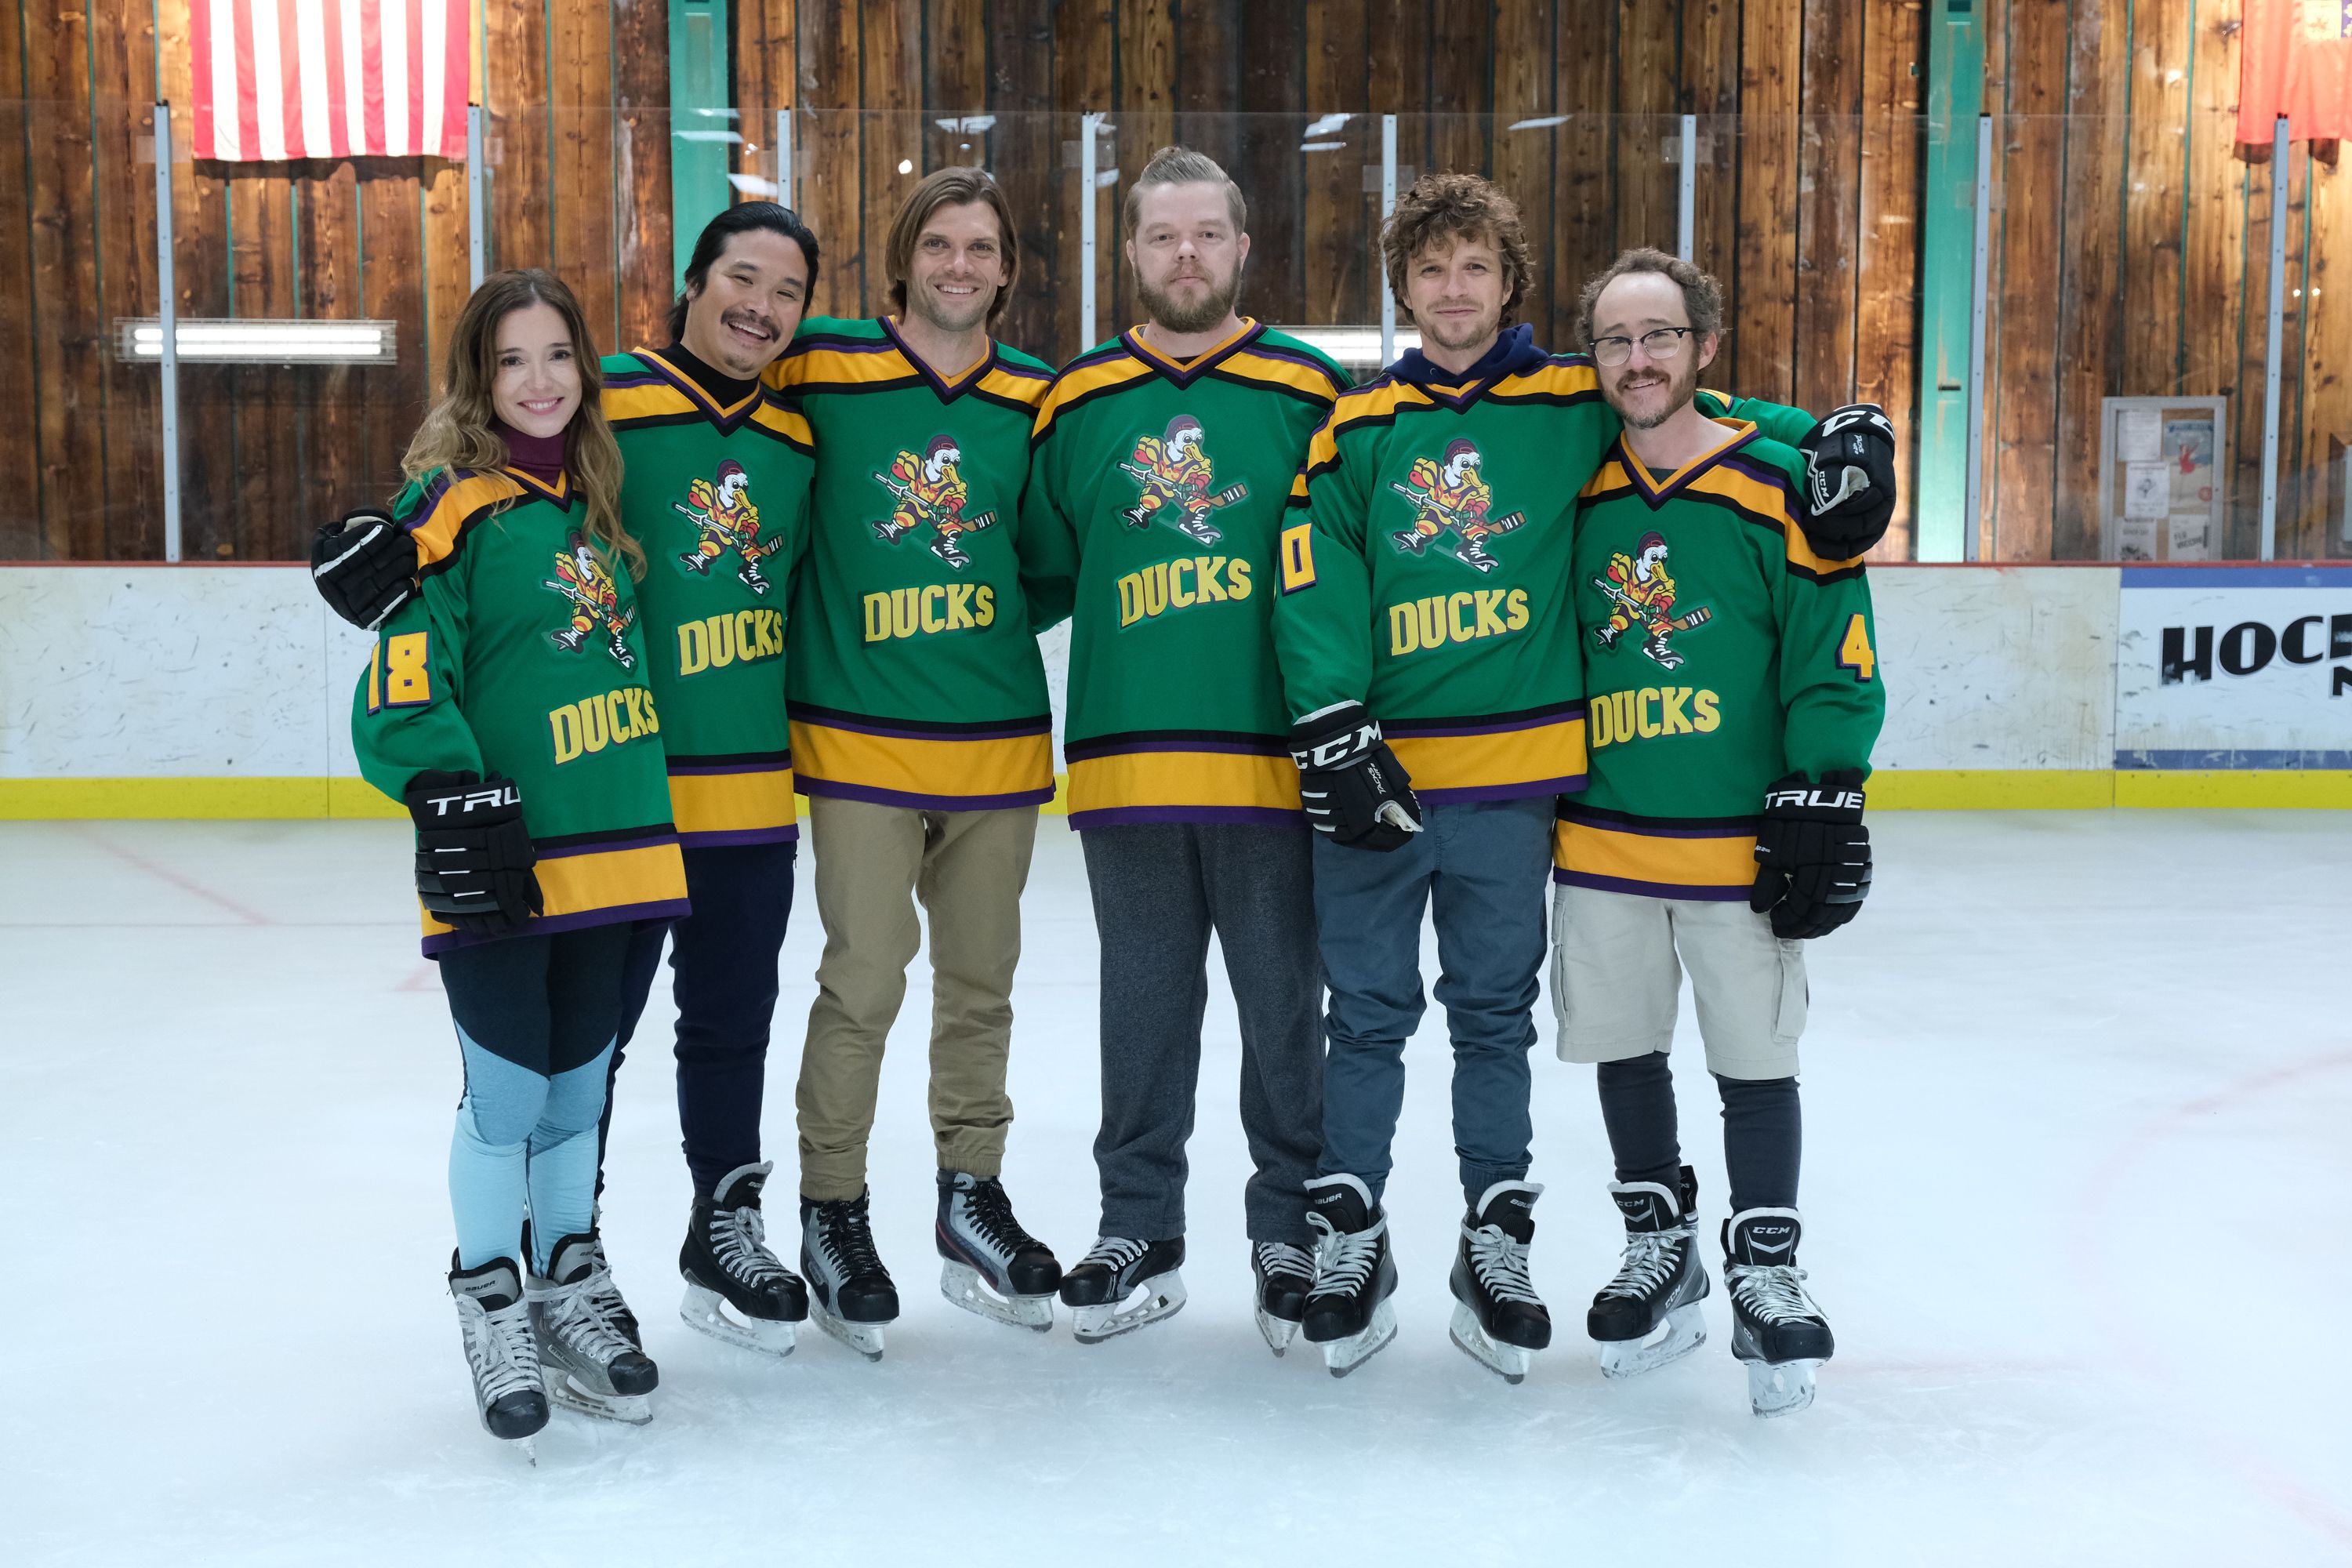 It's A Mighty Ducks Reunion! The Cast Gets Together To Celebrate